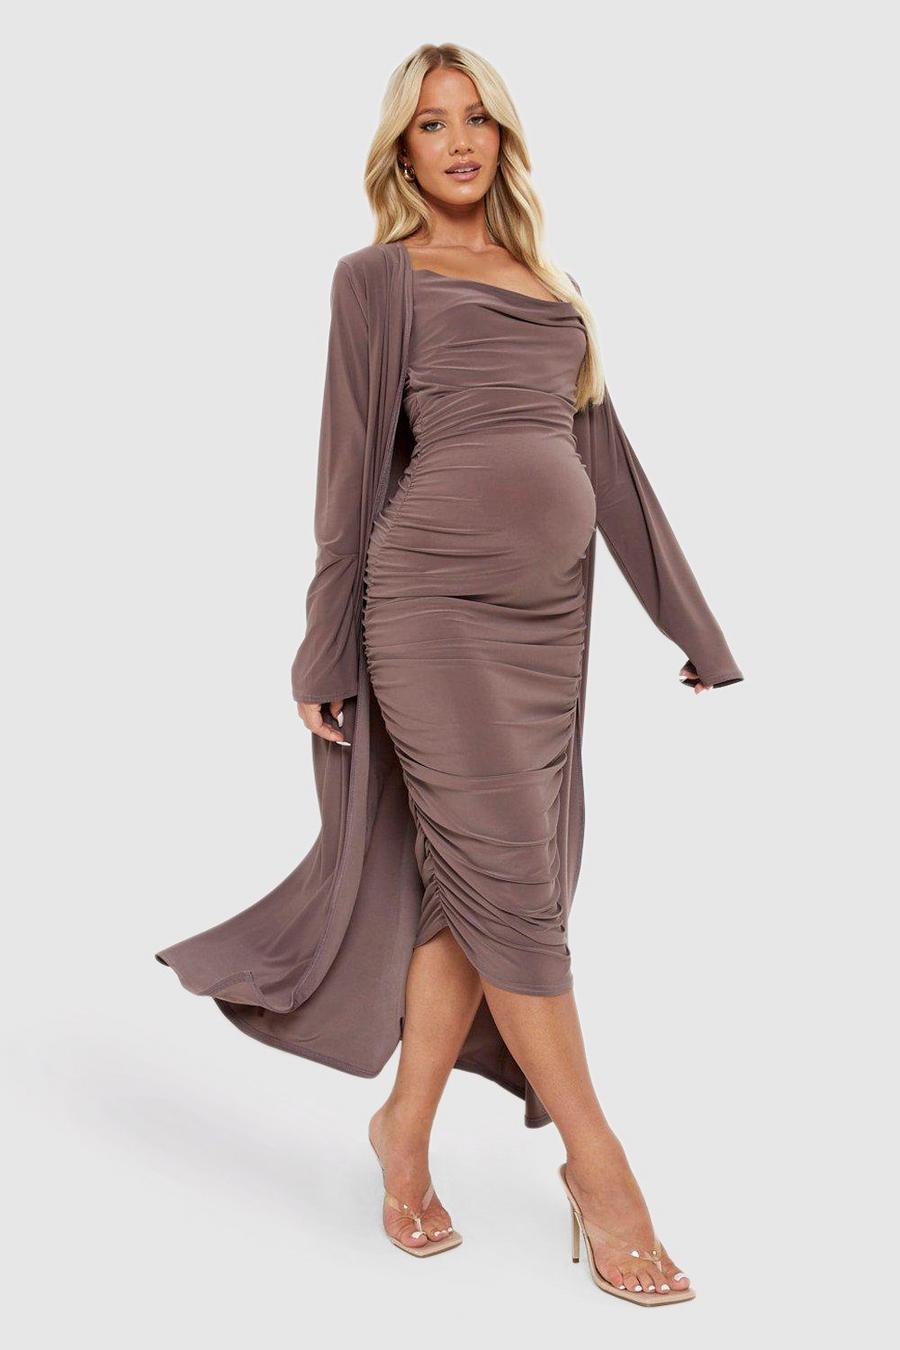 Cute Maternity Clothes From Boohoo